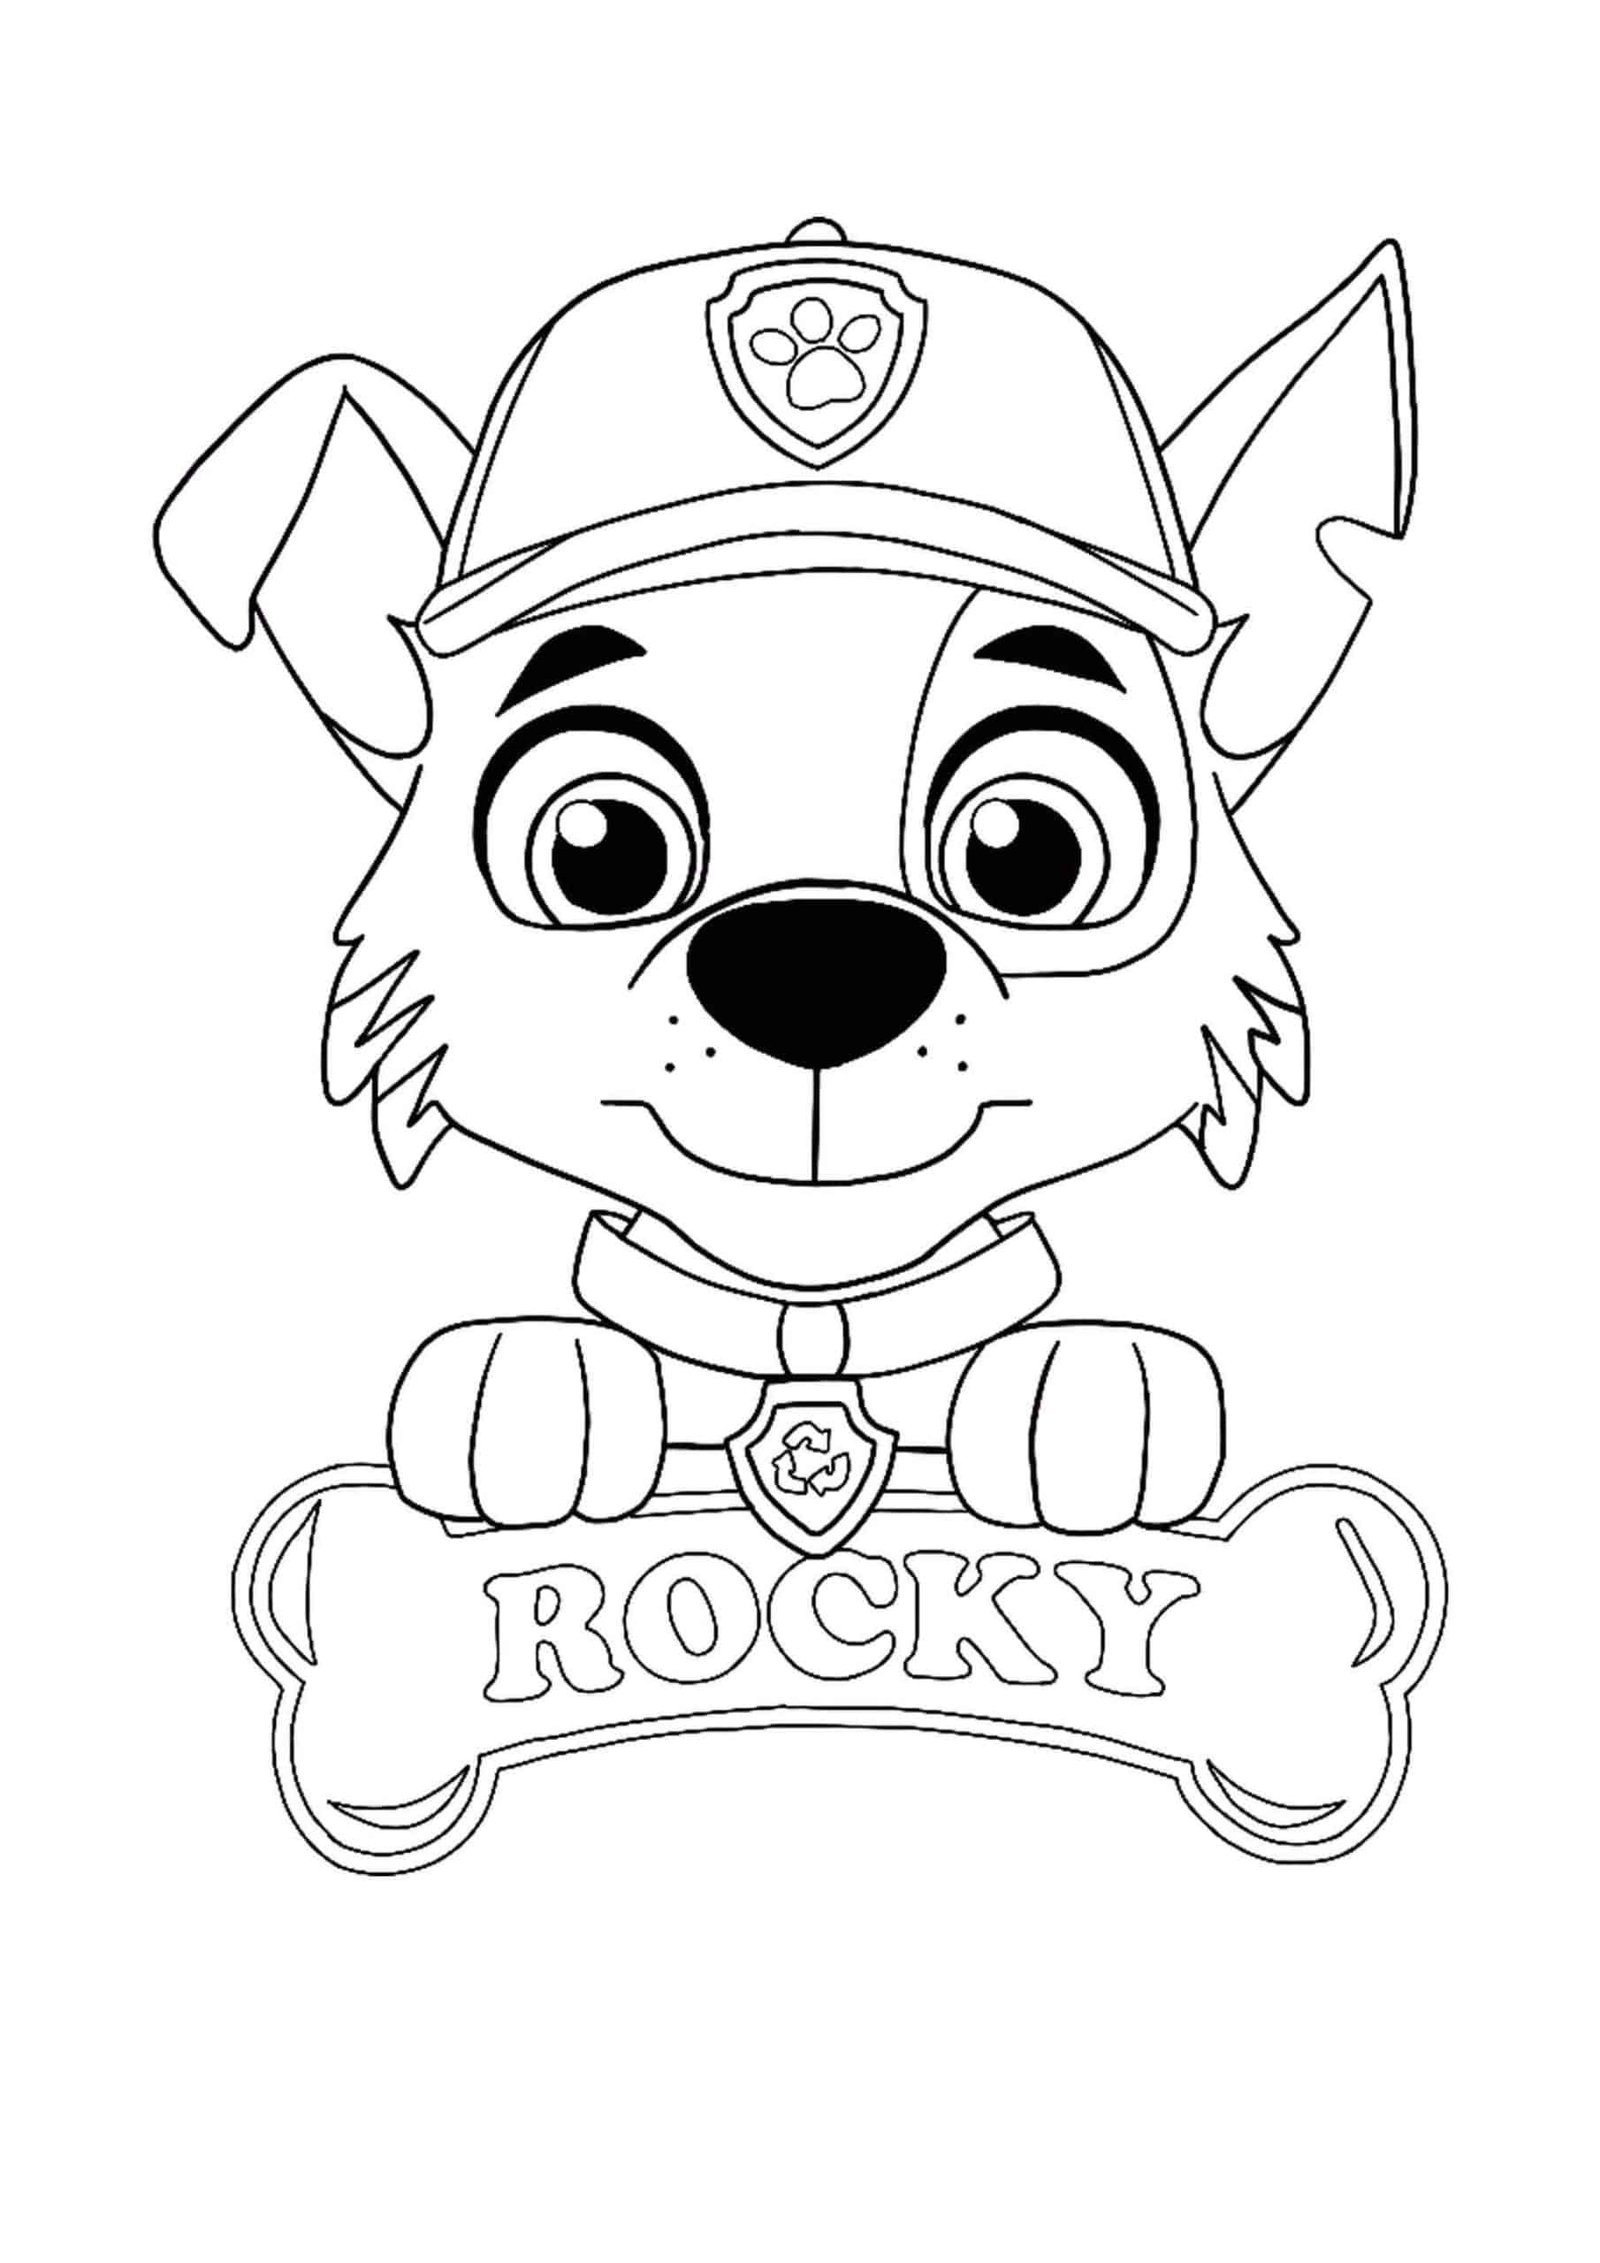 Paw patrol rocky coloring pages